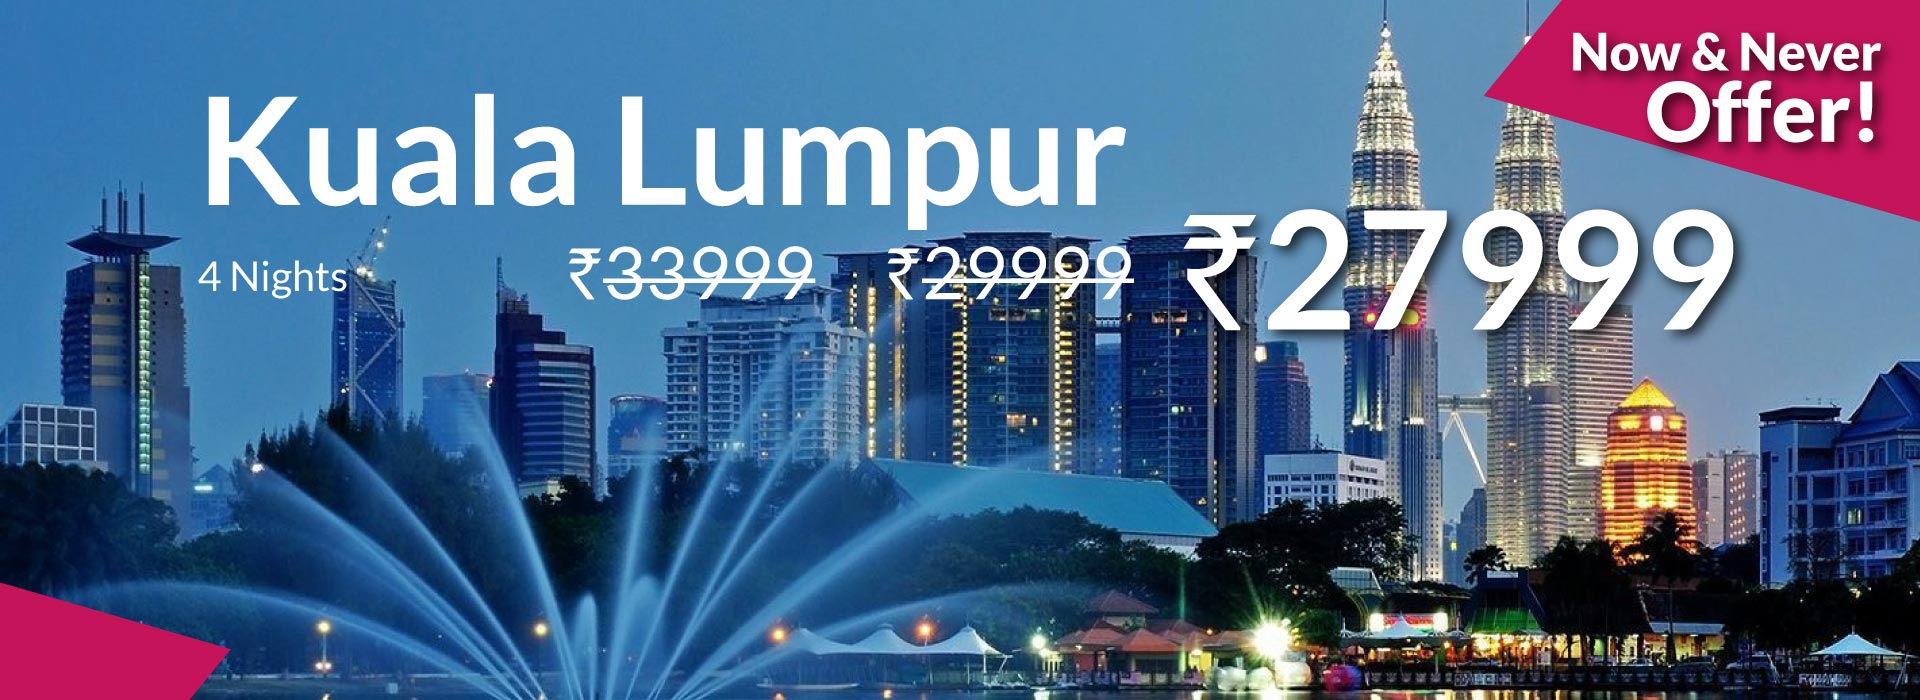 Kuala Lumpur All inclusive Holiday Deal Package on